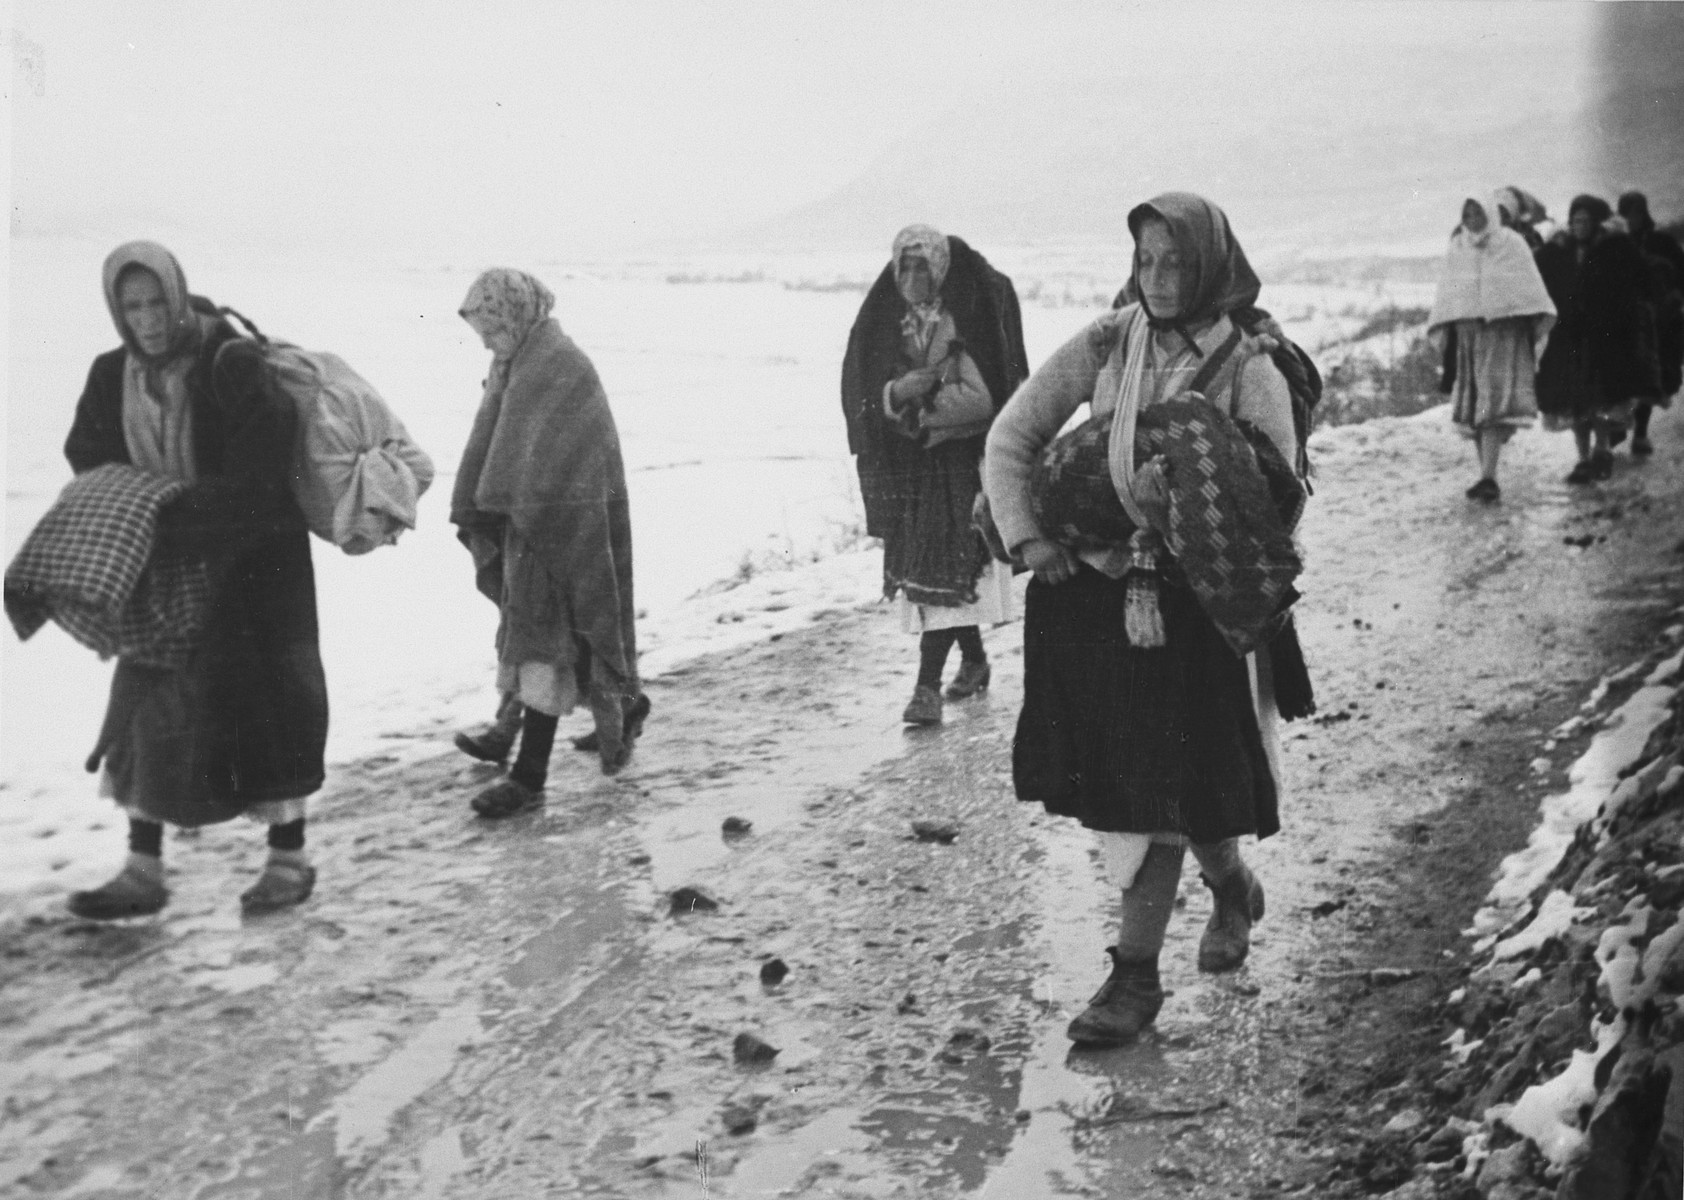 Female refugees walk down a path in Croatia, carrying their belongings. 

The original Waffen-SS caption reads,  "Fluechtlinge, die von den Partisanen gewaltsam mitgeschleppt wurden, kehren in ihre Heimat zurueck."  (Tranlsated, "Refugees, who were forcibly carted off by partisans, return to their homes."

One of a series of photographs taken by the 7th SS Volunteer Mountain Division Prinz Eugen in Croatia, Serbia, and Montenegro from 1942 to 1944, after the German invasion of the Kingdom of Yugoslavia. The photographs are believed to have been captioned by the commanding office of the Waffen-SS, and had been in the possession of  Friedrich Wilhem Krueger, who served with the division from November 1943 until April 1944.